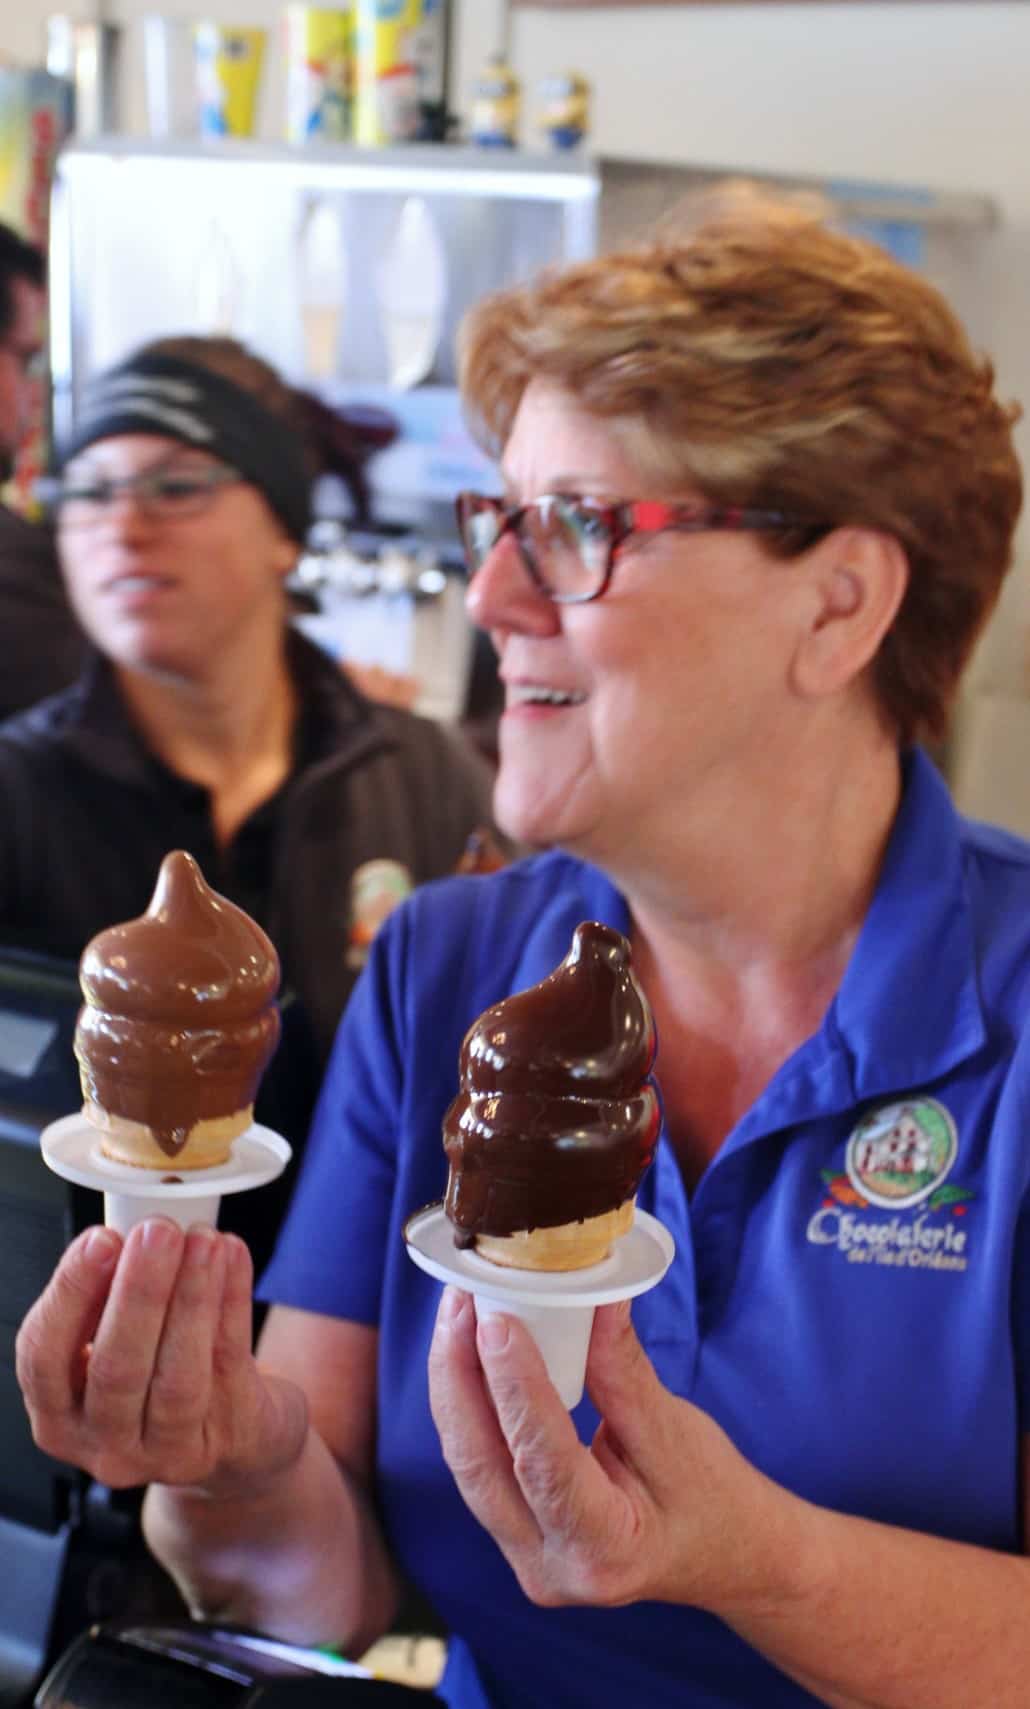 Sampling chocolate dipped ice cream at Chocolaterie de l'Ile d'Orléans (Credit: Bill Rockwell)